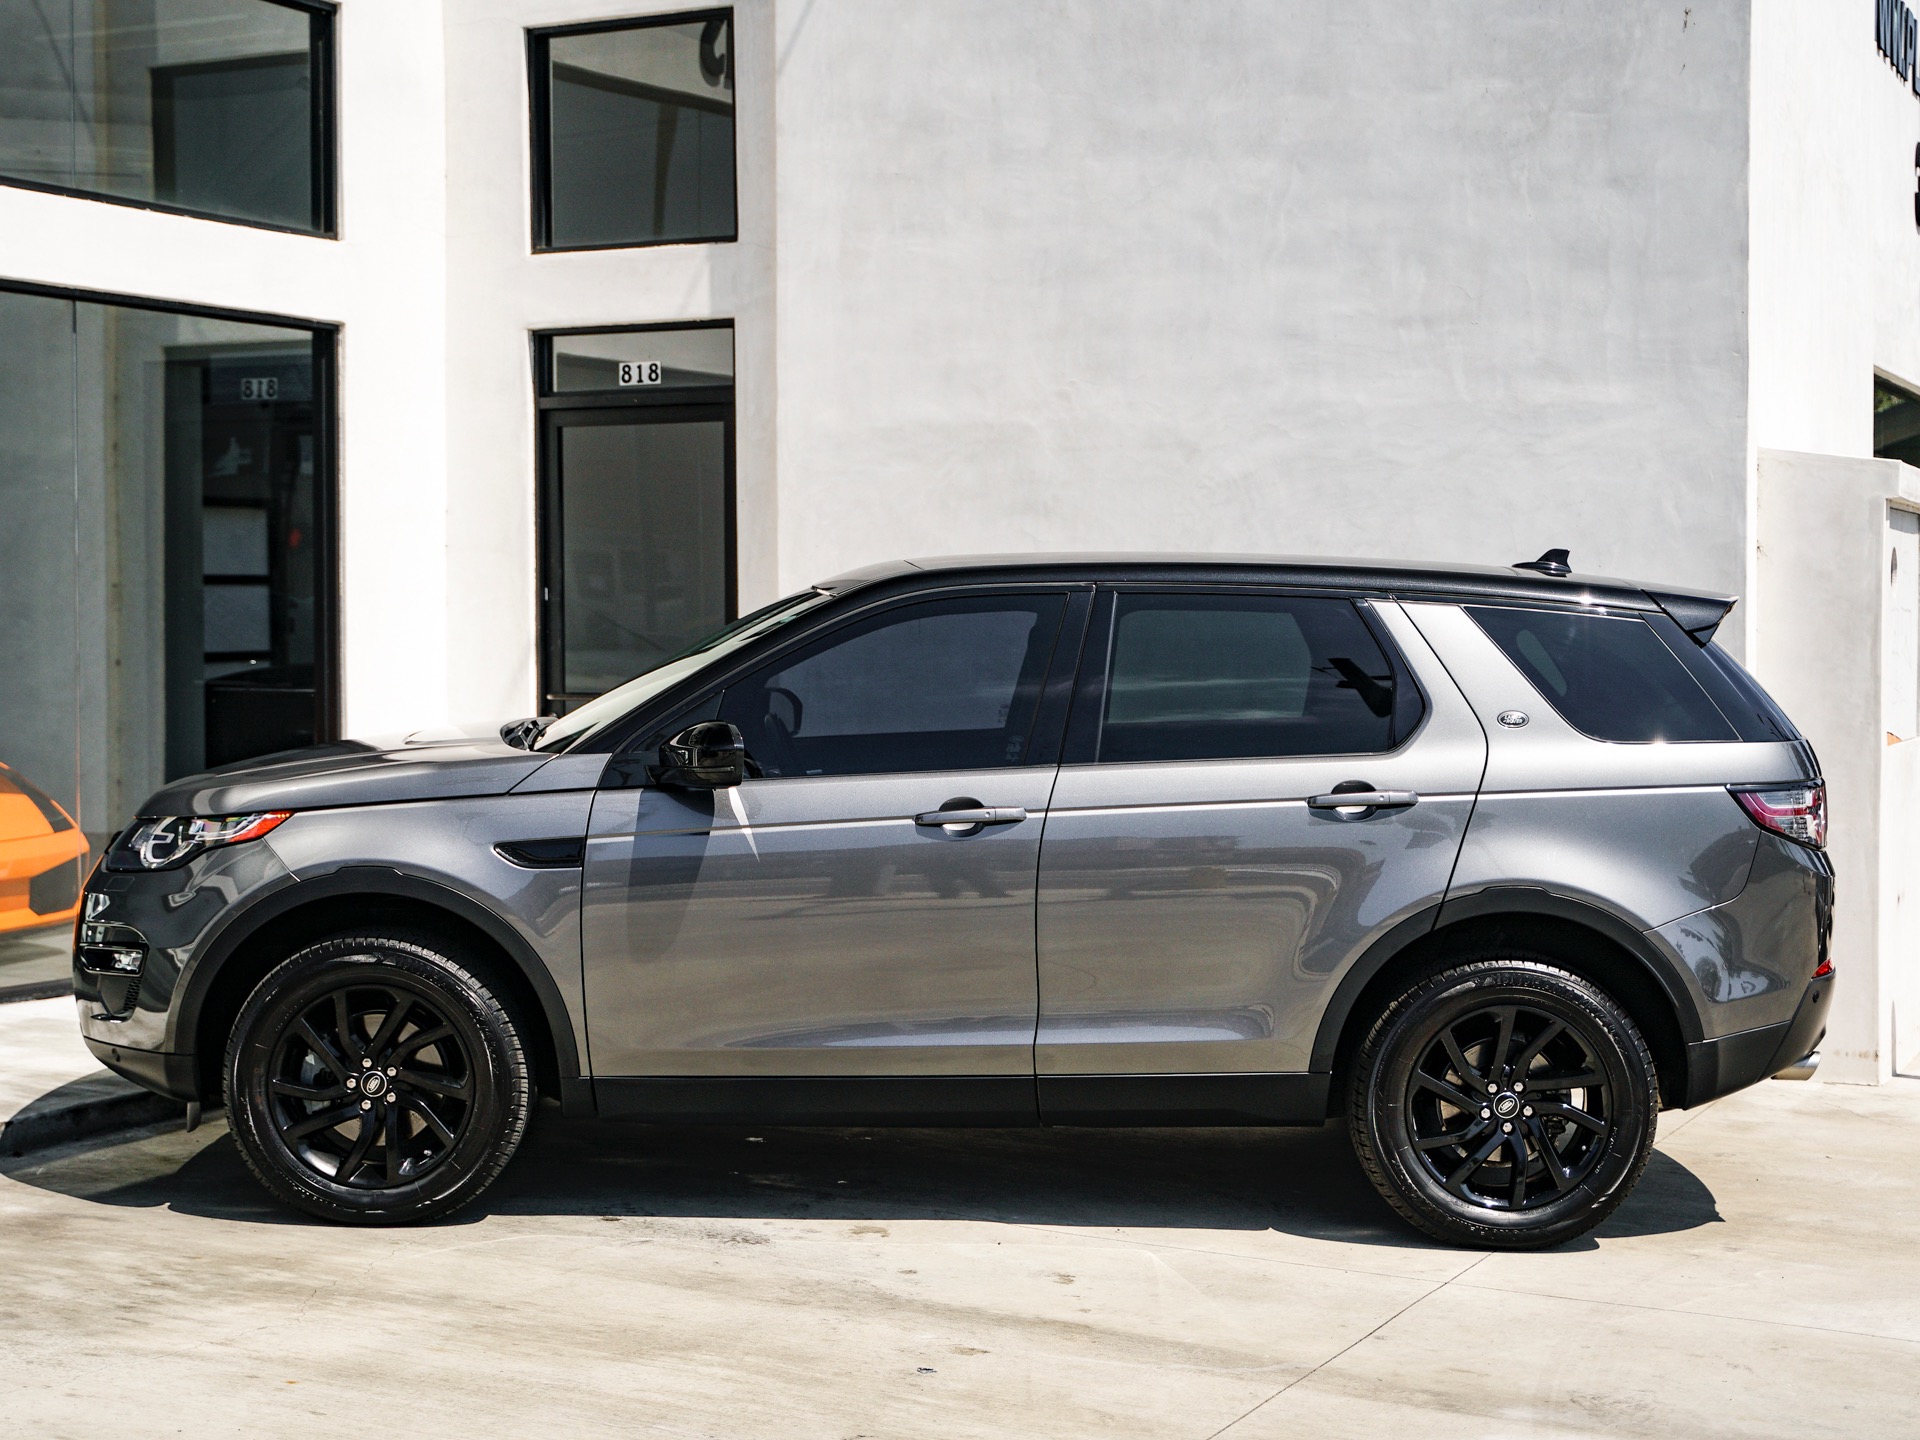 Emotie andere Puur 2016 Land Rover Discovery Sport HSE Stock # 6898 for sale near Redondo  Beach, CA | CA Land Rover Dealer